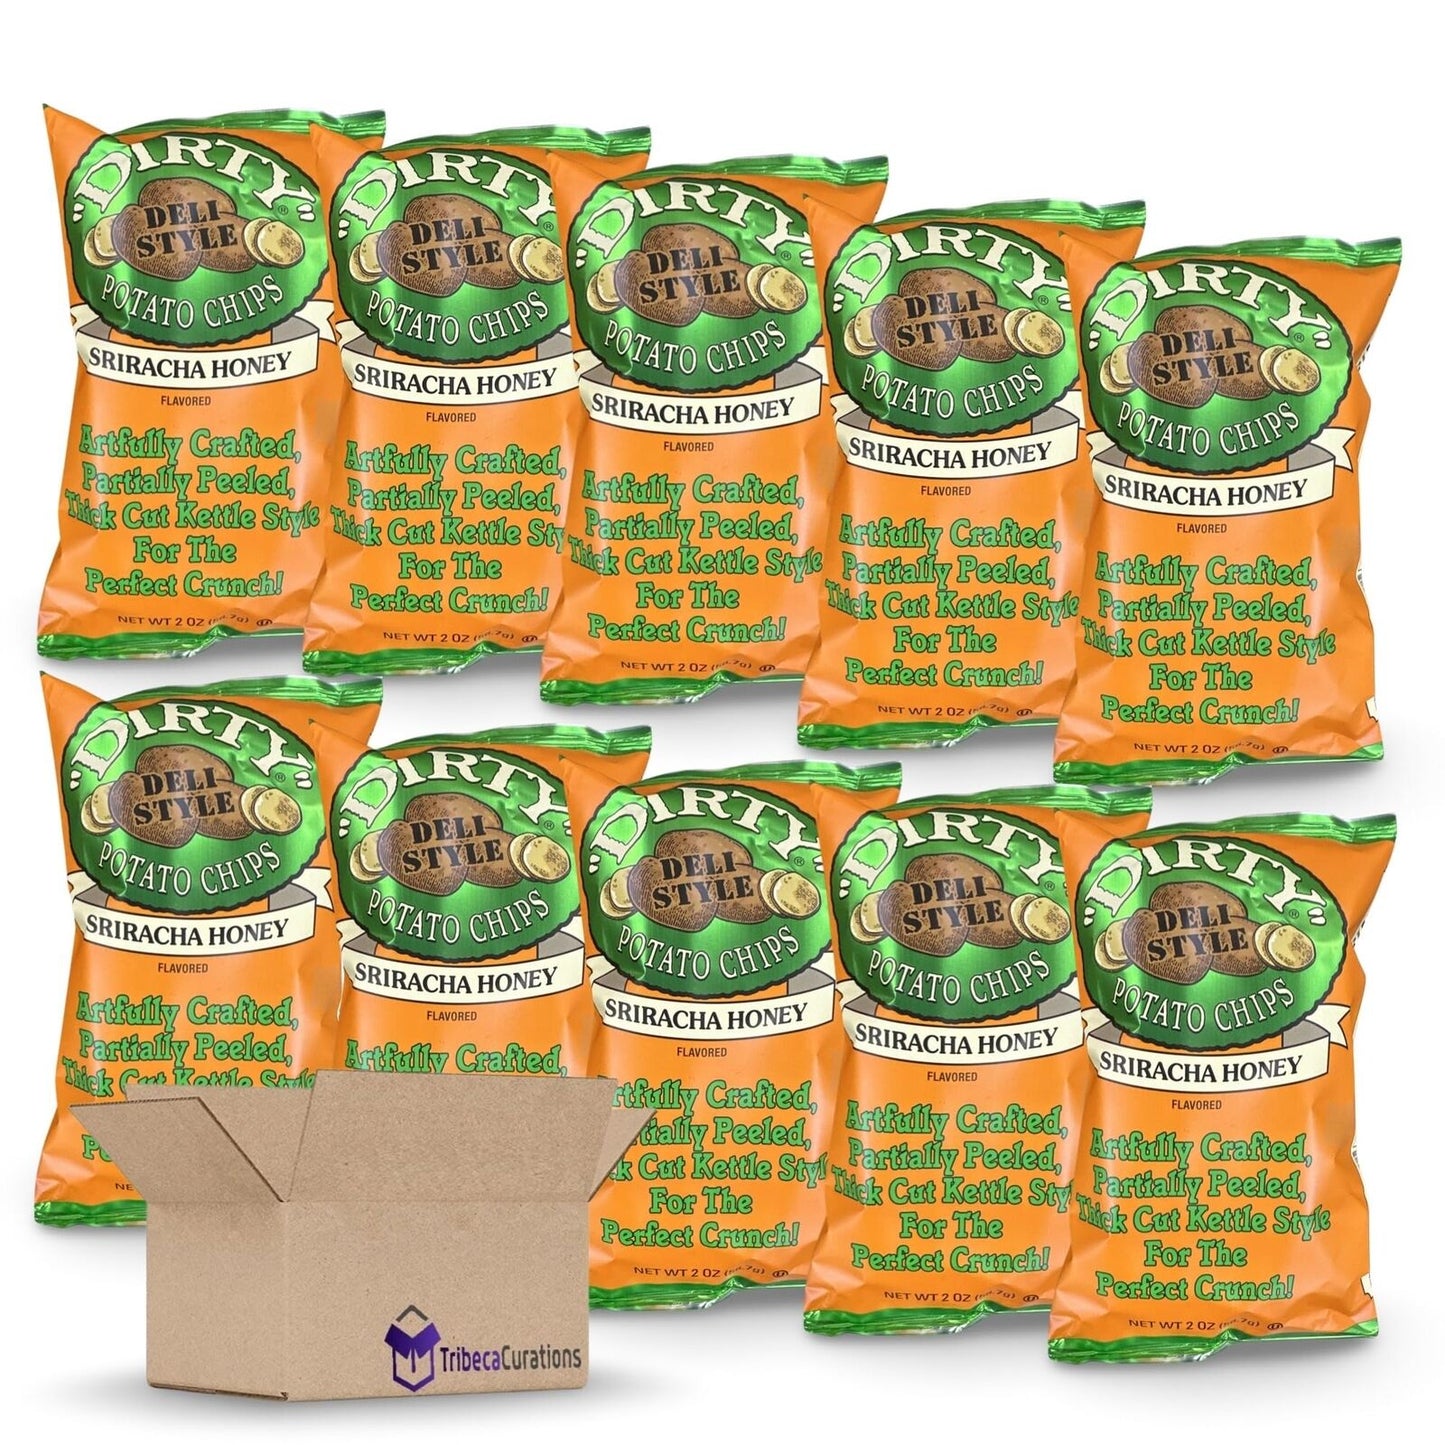 Deli Style Potato Chips Value Pack | Bundled by Tribeca Curations, Sriracha